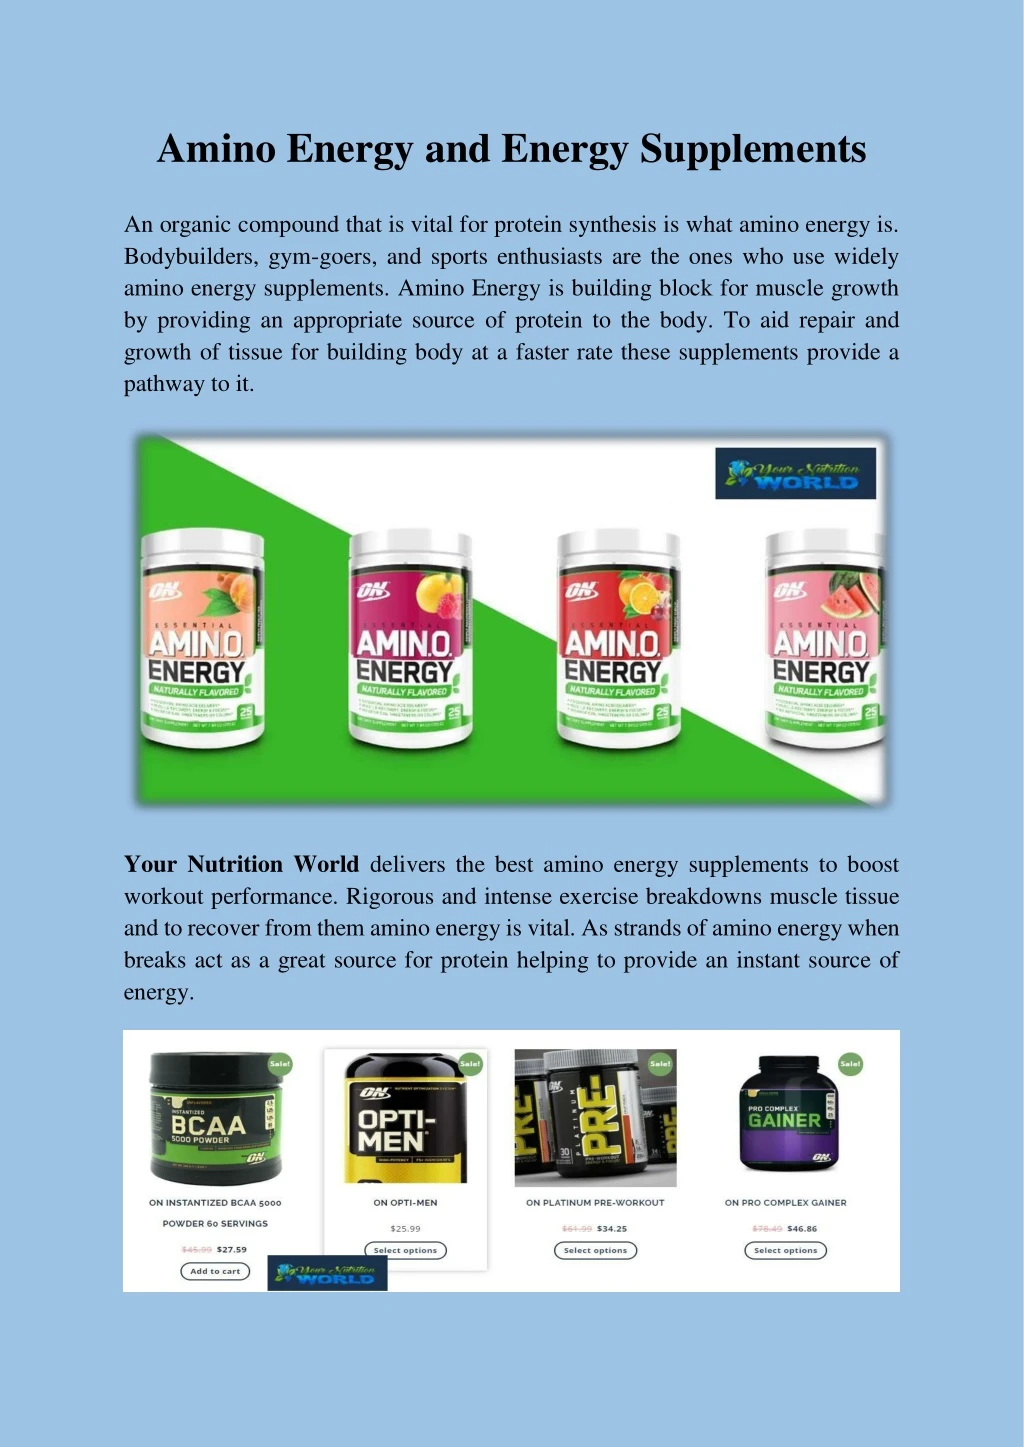 amino energy and energy supplements